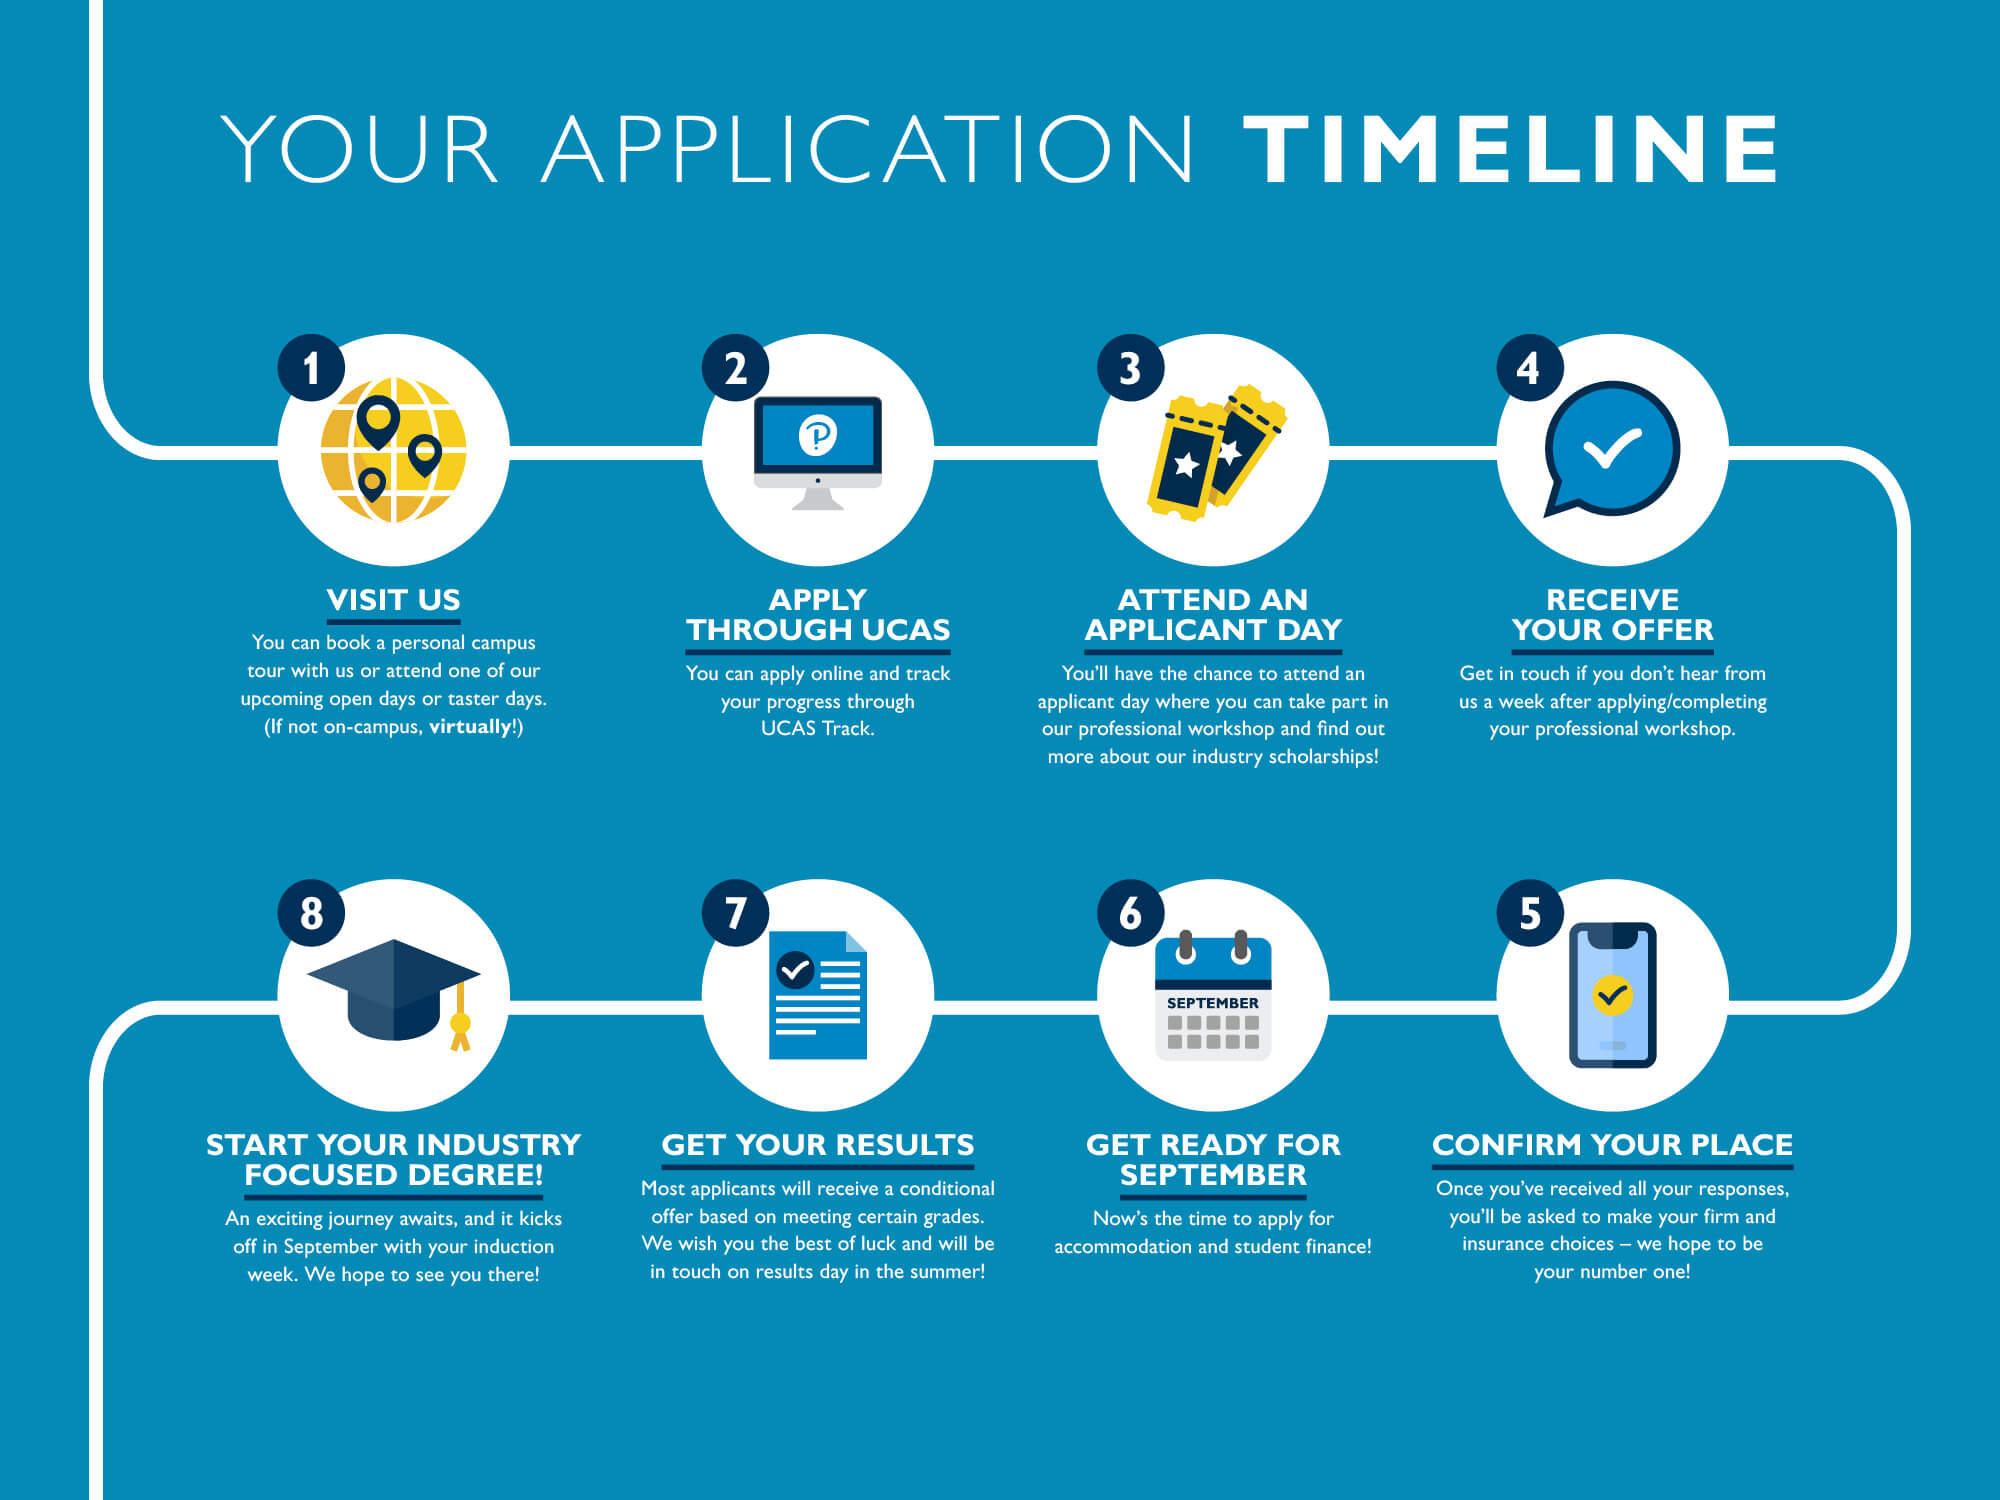 Info graphic of the Pearson Business School application timeline